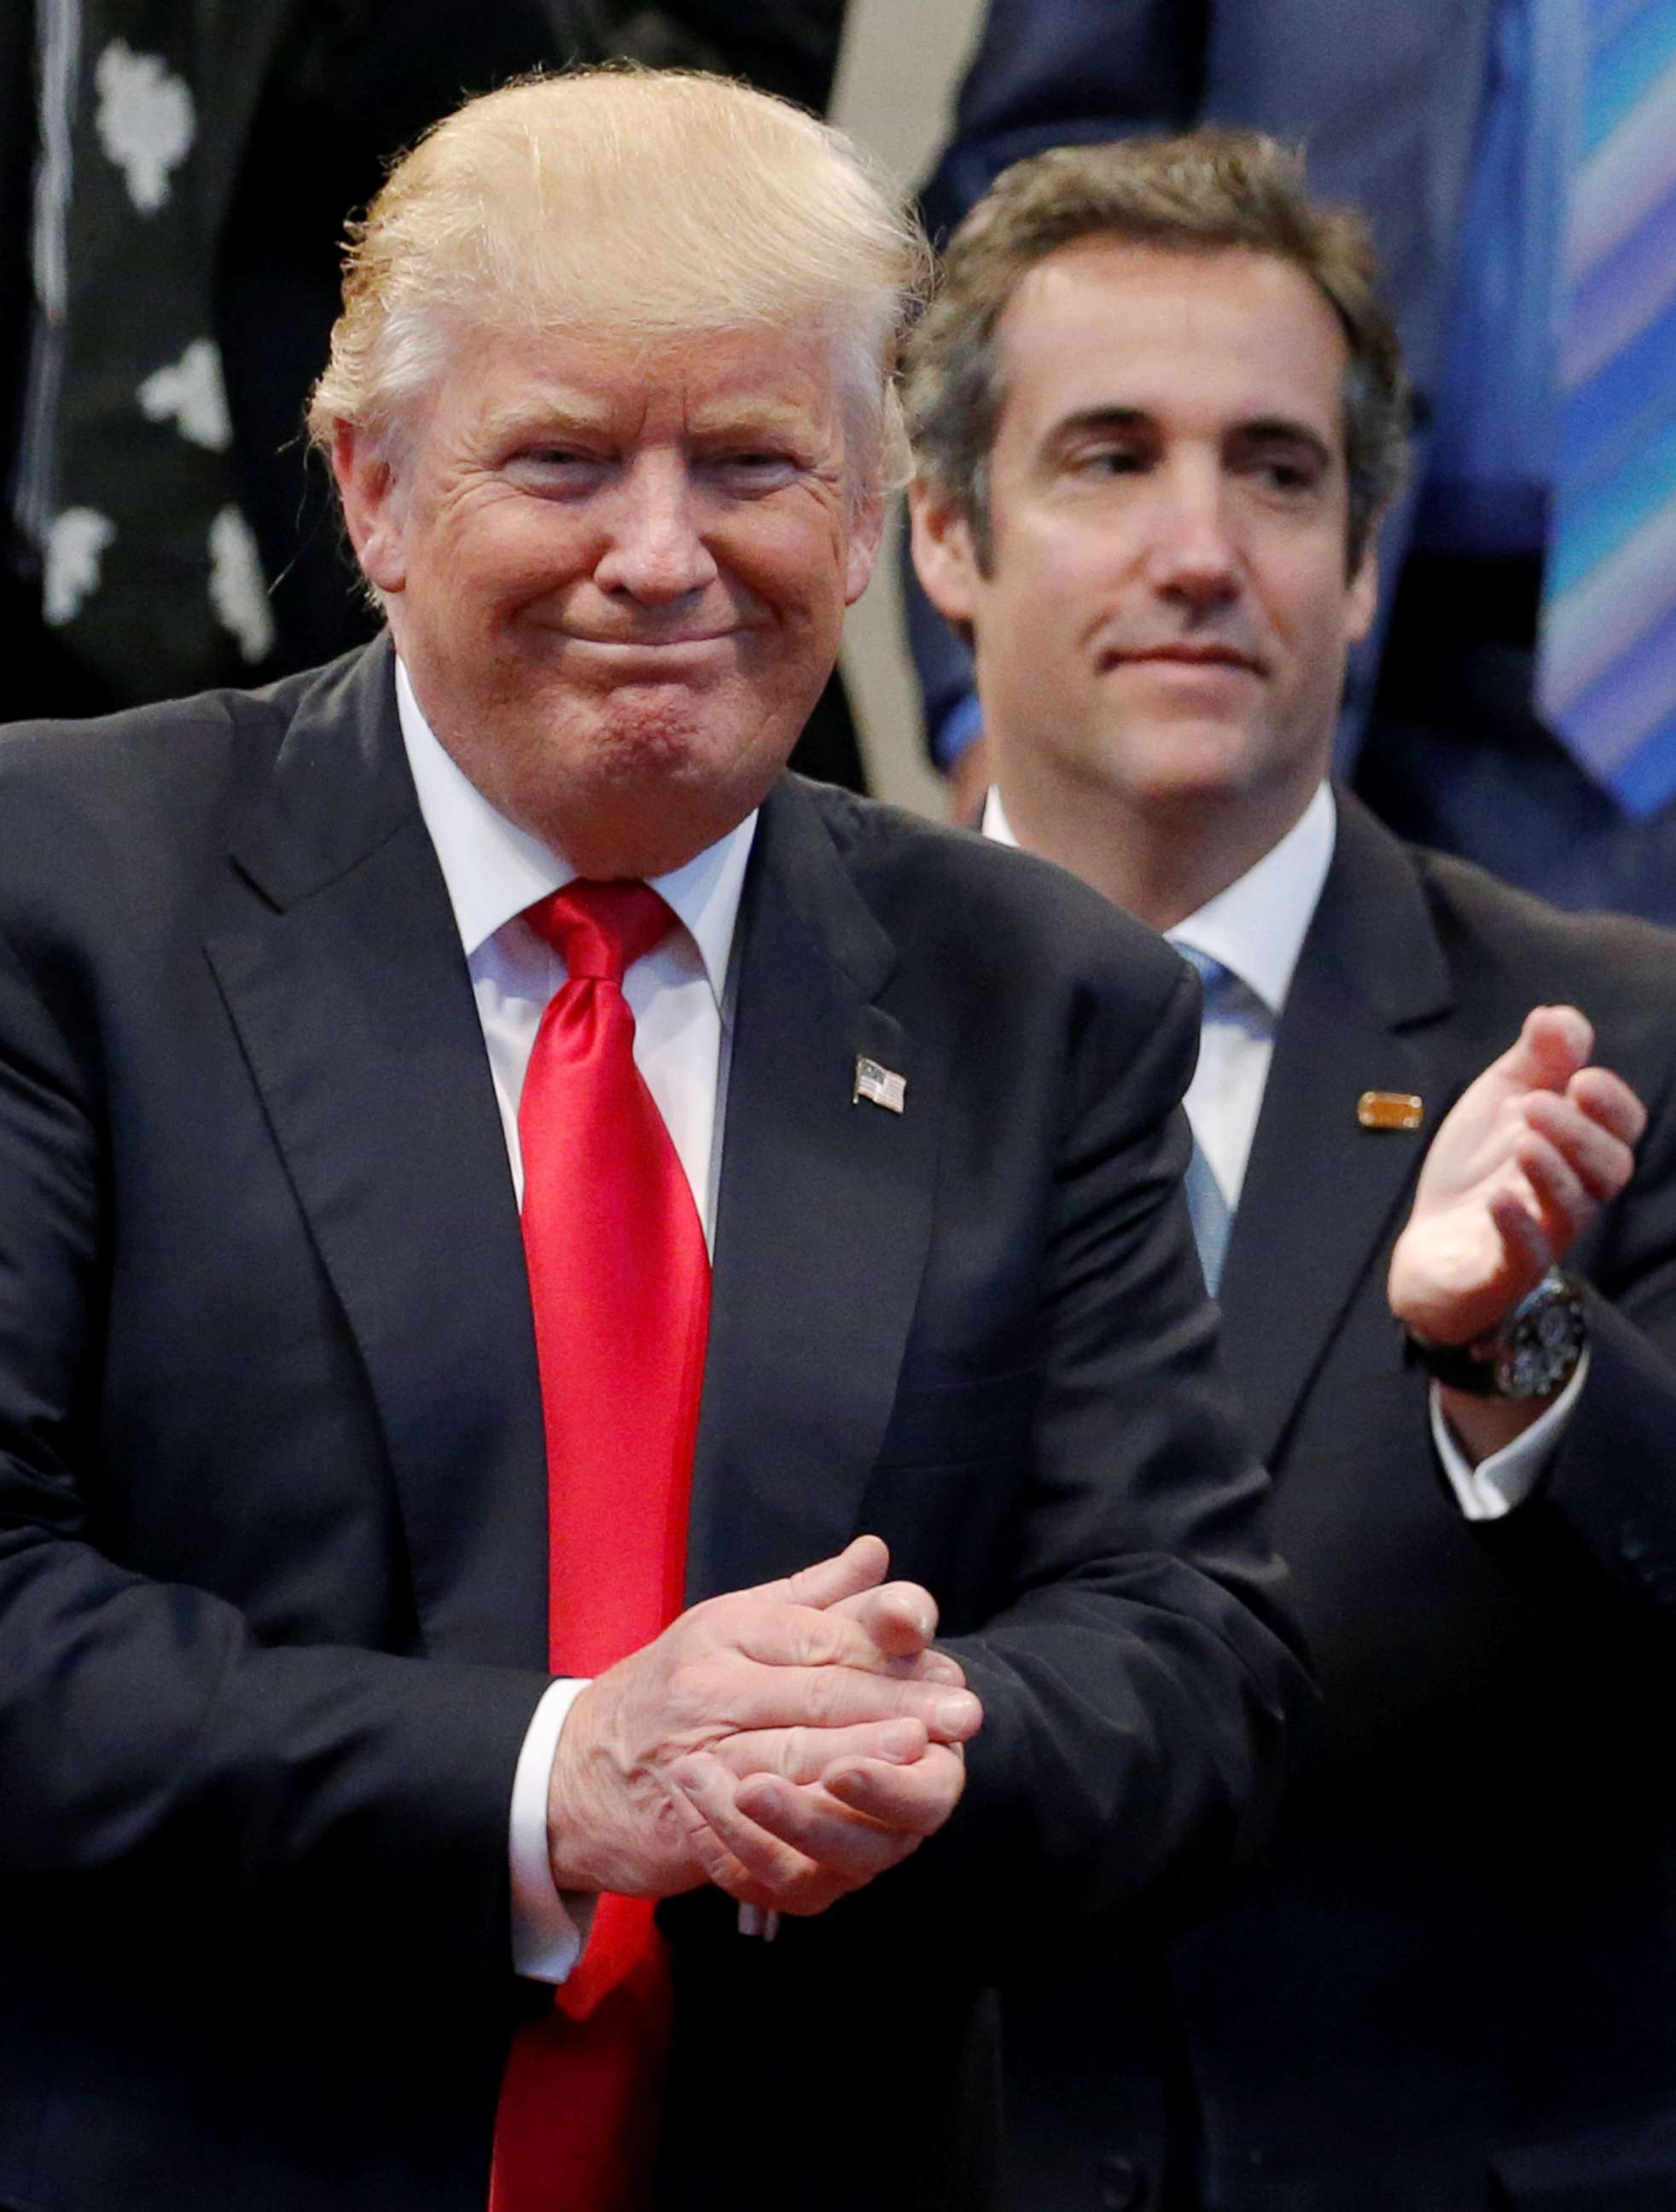 PHOTO: Then Republican presidential nominee Donald Trump appears with his personal attorney Michael Cohen during a campaign stop at the New Spirit Revival Center church in Cleveland Heights, Ohio, Sept. 21, 2016. 